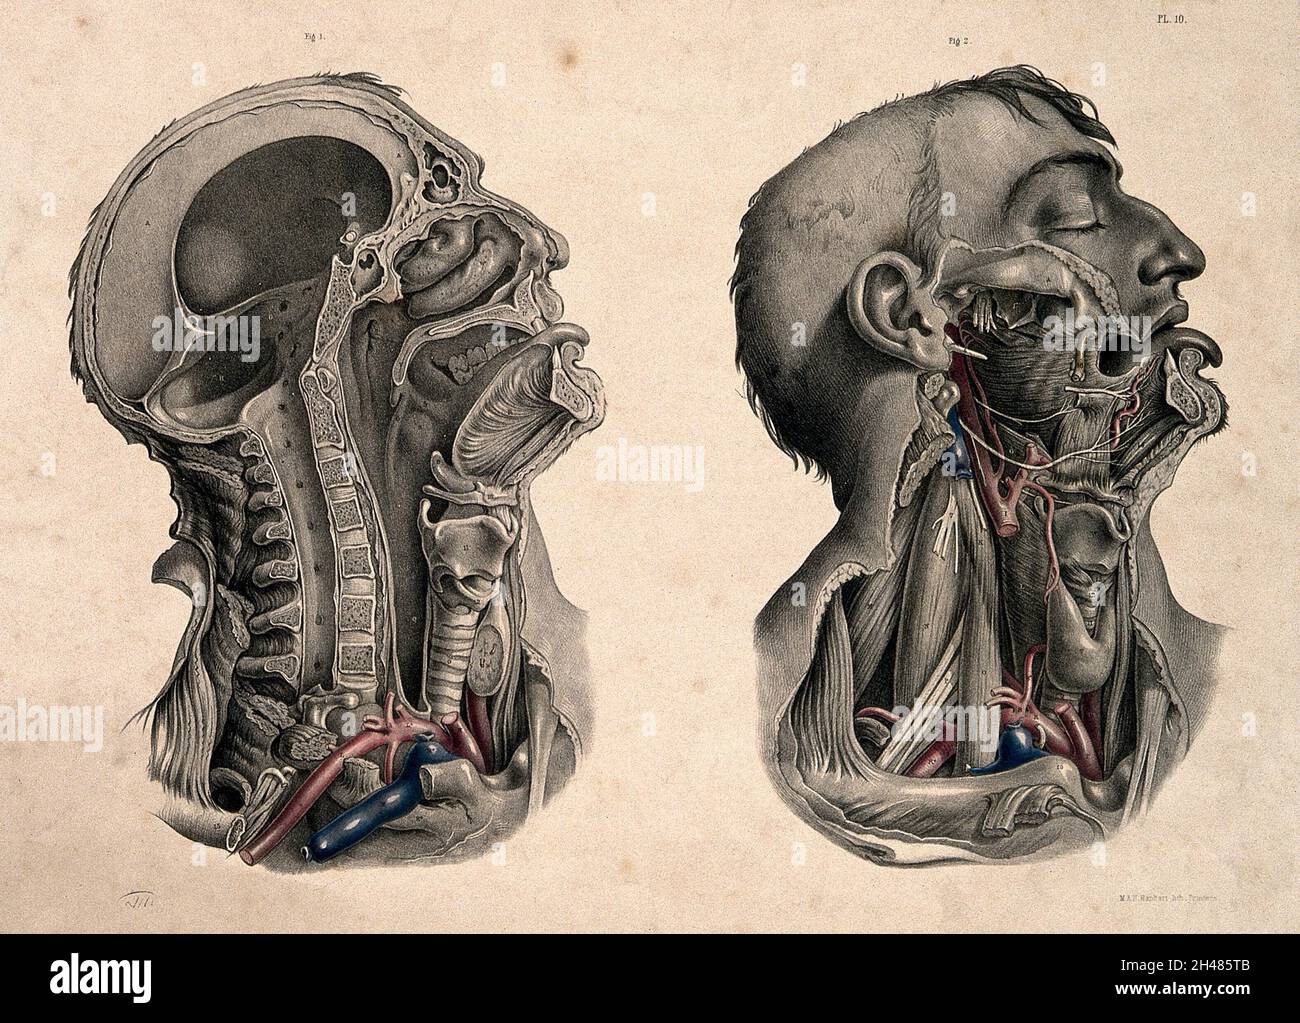 Dissection of the head and neck: two figures. Coloured lithograph by J. Maclise, 1851. Stock Photo